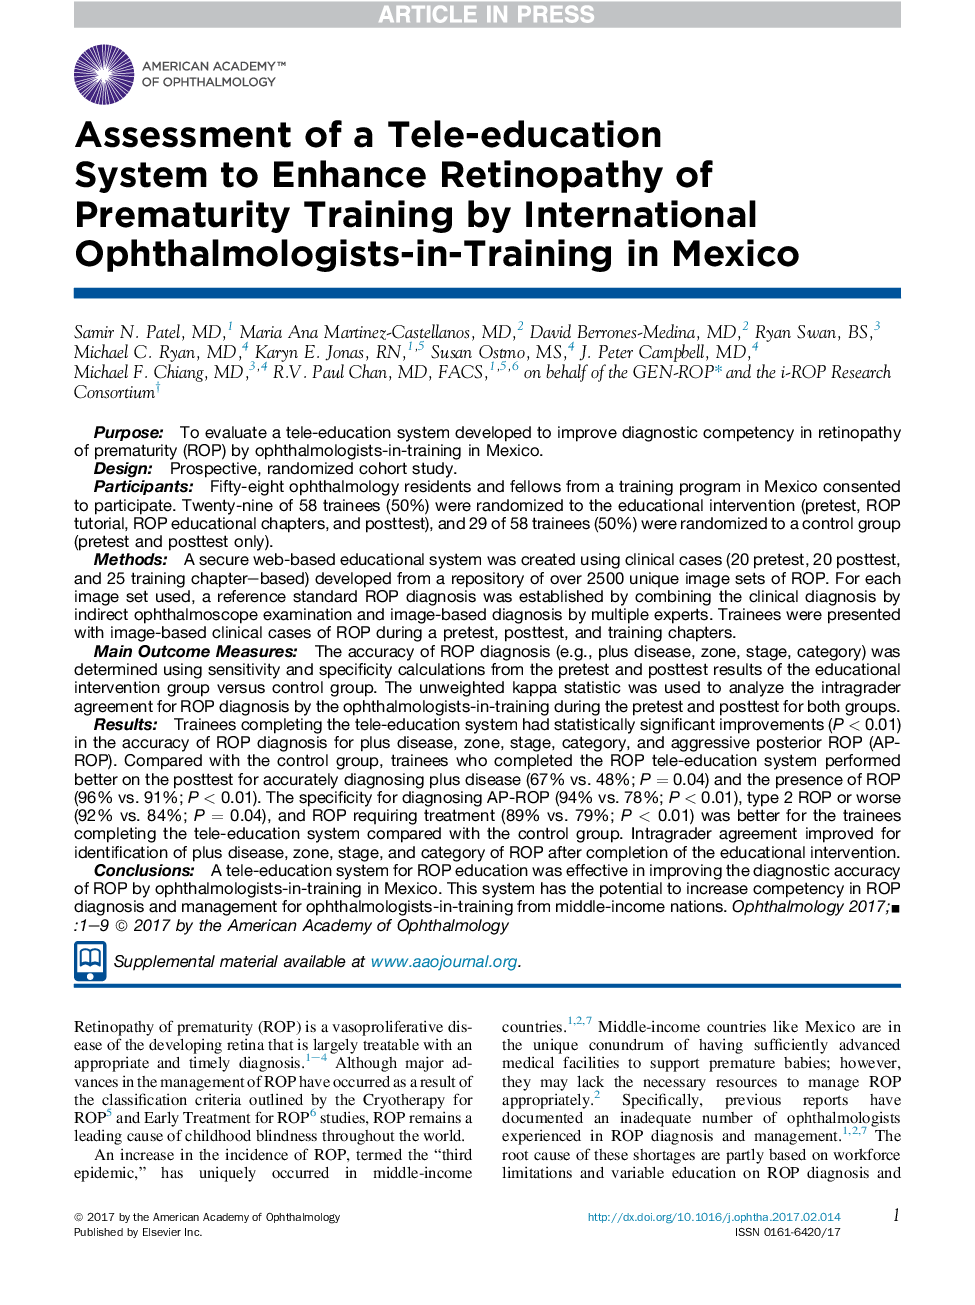 Assessment of a Tele-education SystemÂ toÂ Enhance Retinopathy of Prematurity Training by International Ophthalmologists-in-Training in Mexico